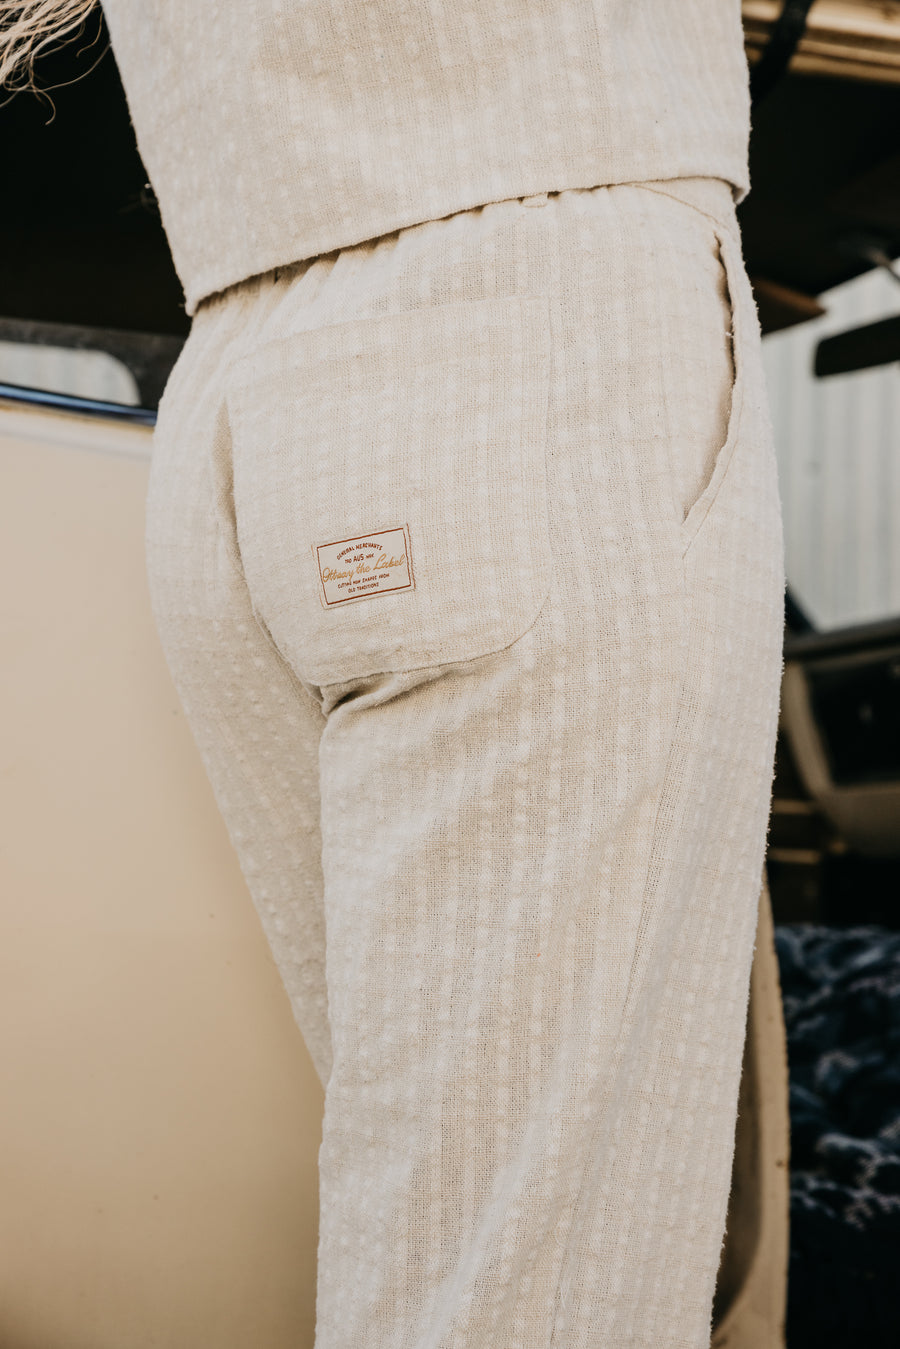 Bowie - Unisex Cream Checked Pants